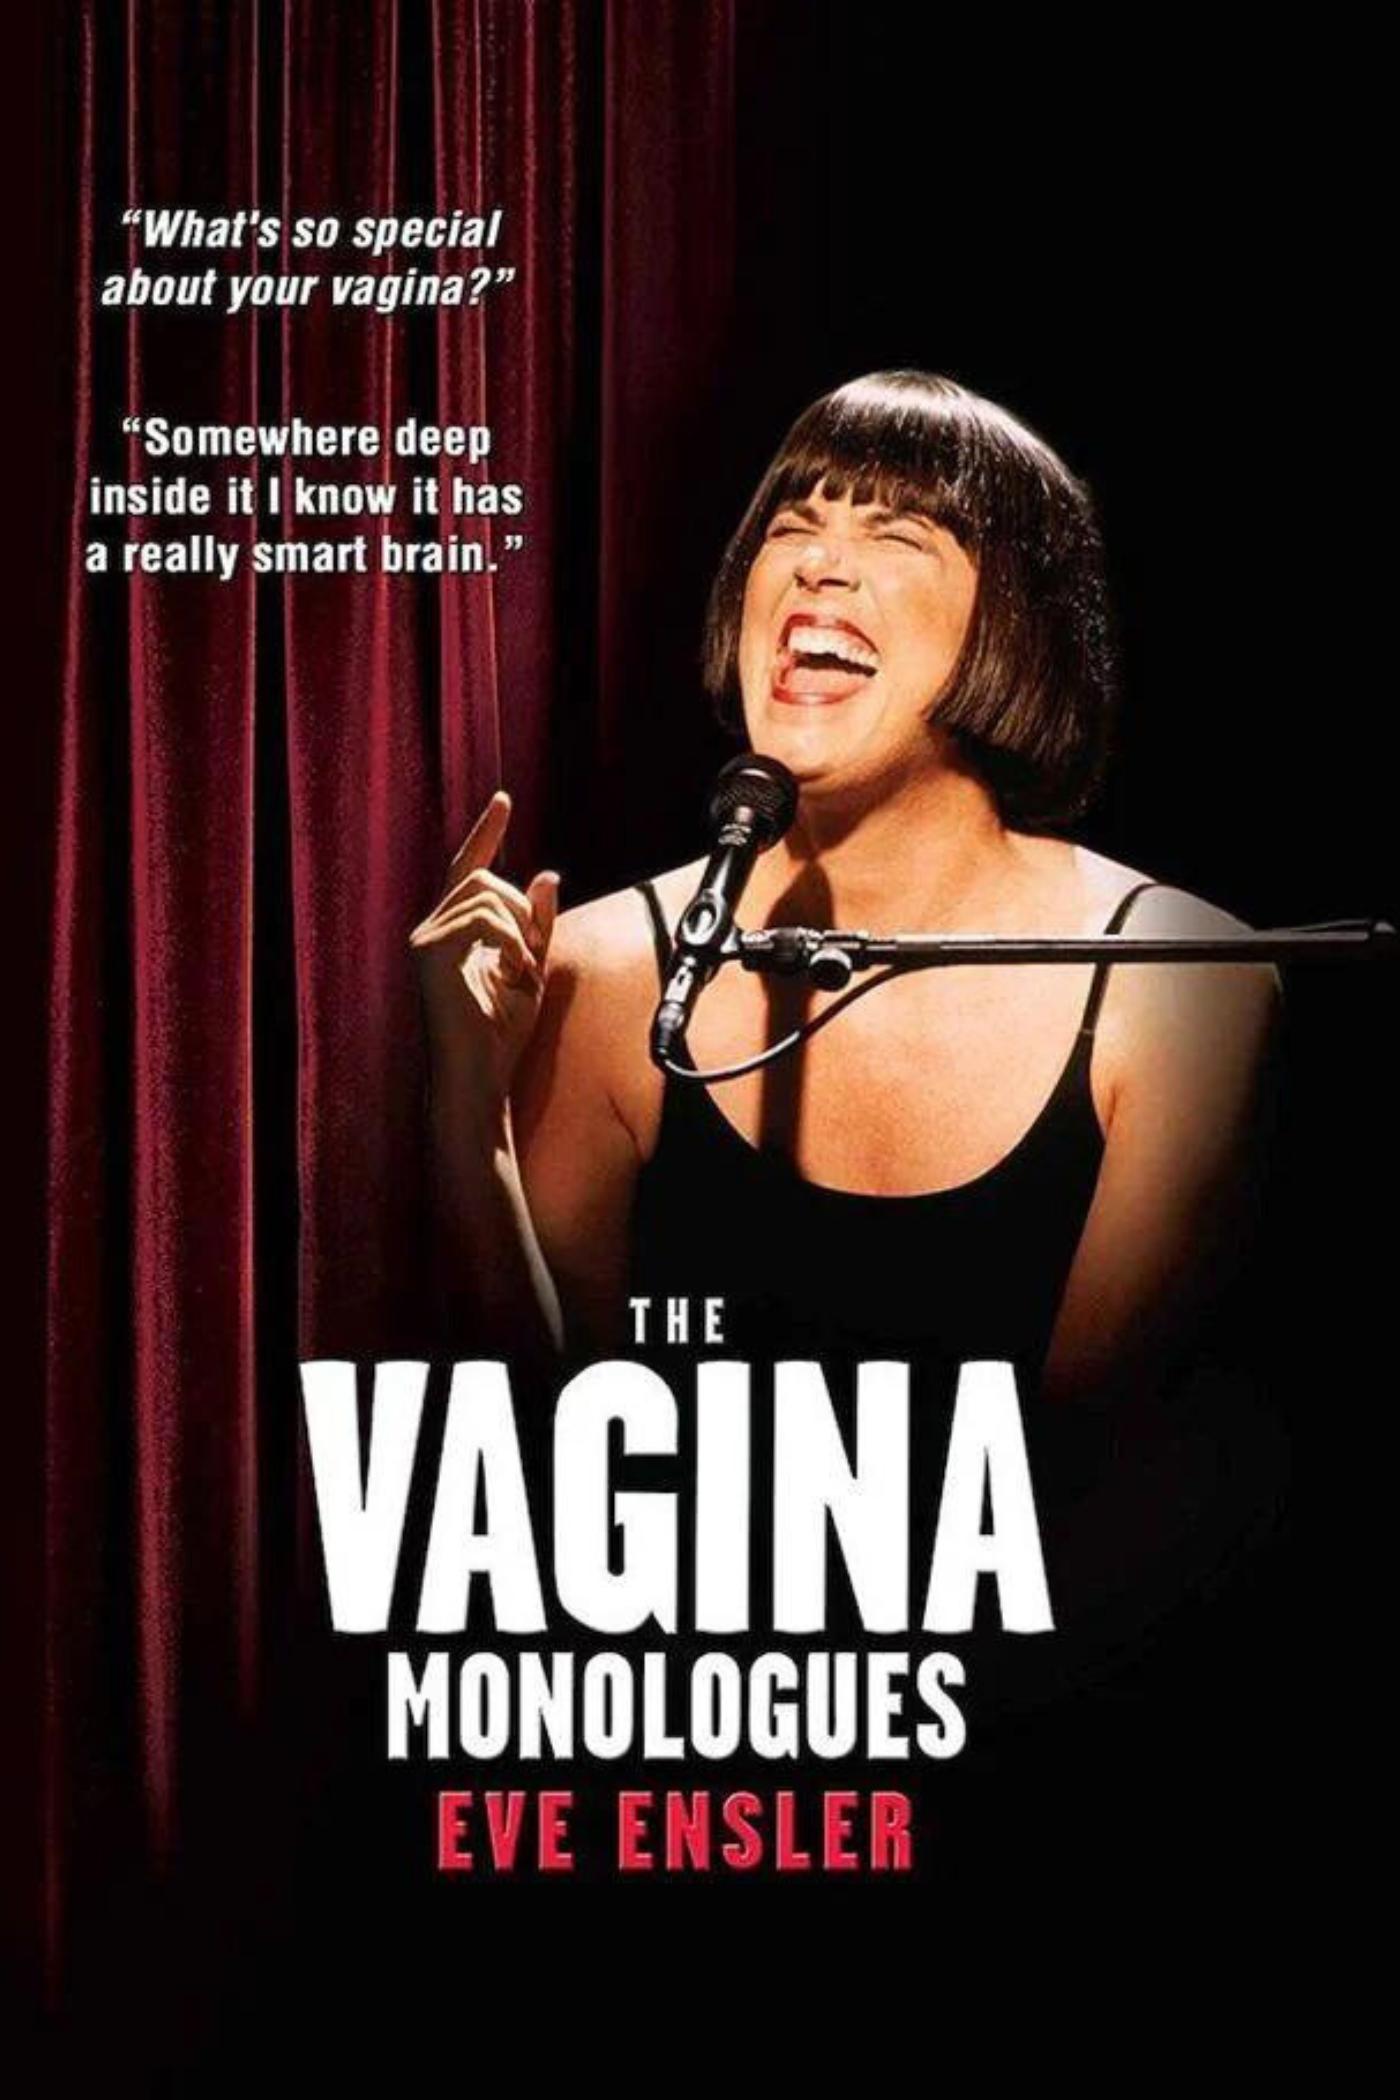 V, The Vagina Monologues Poster.png